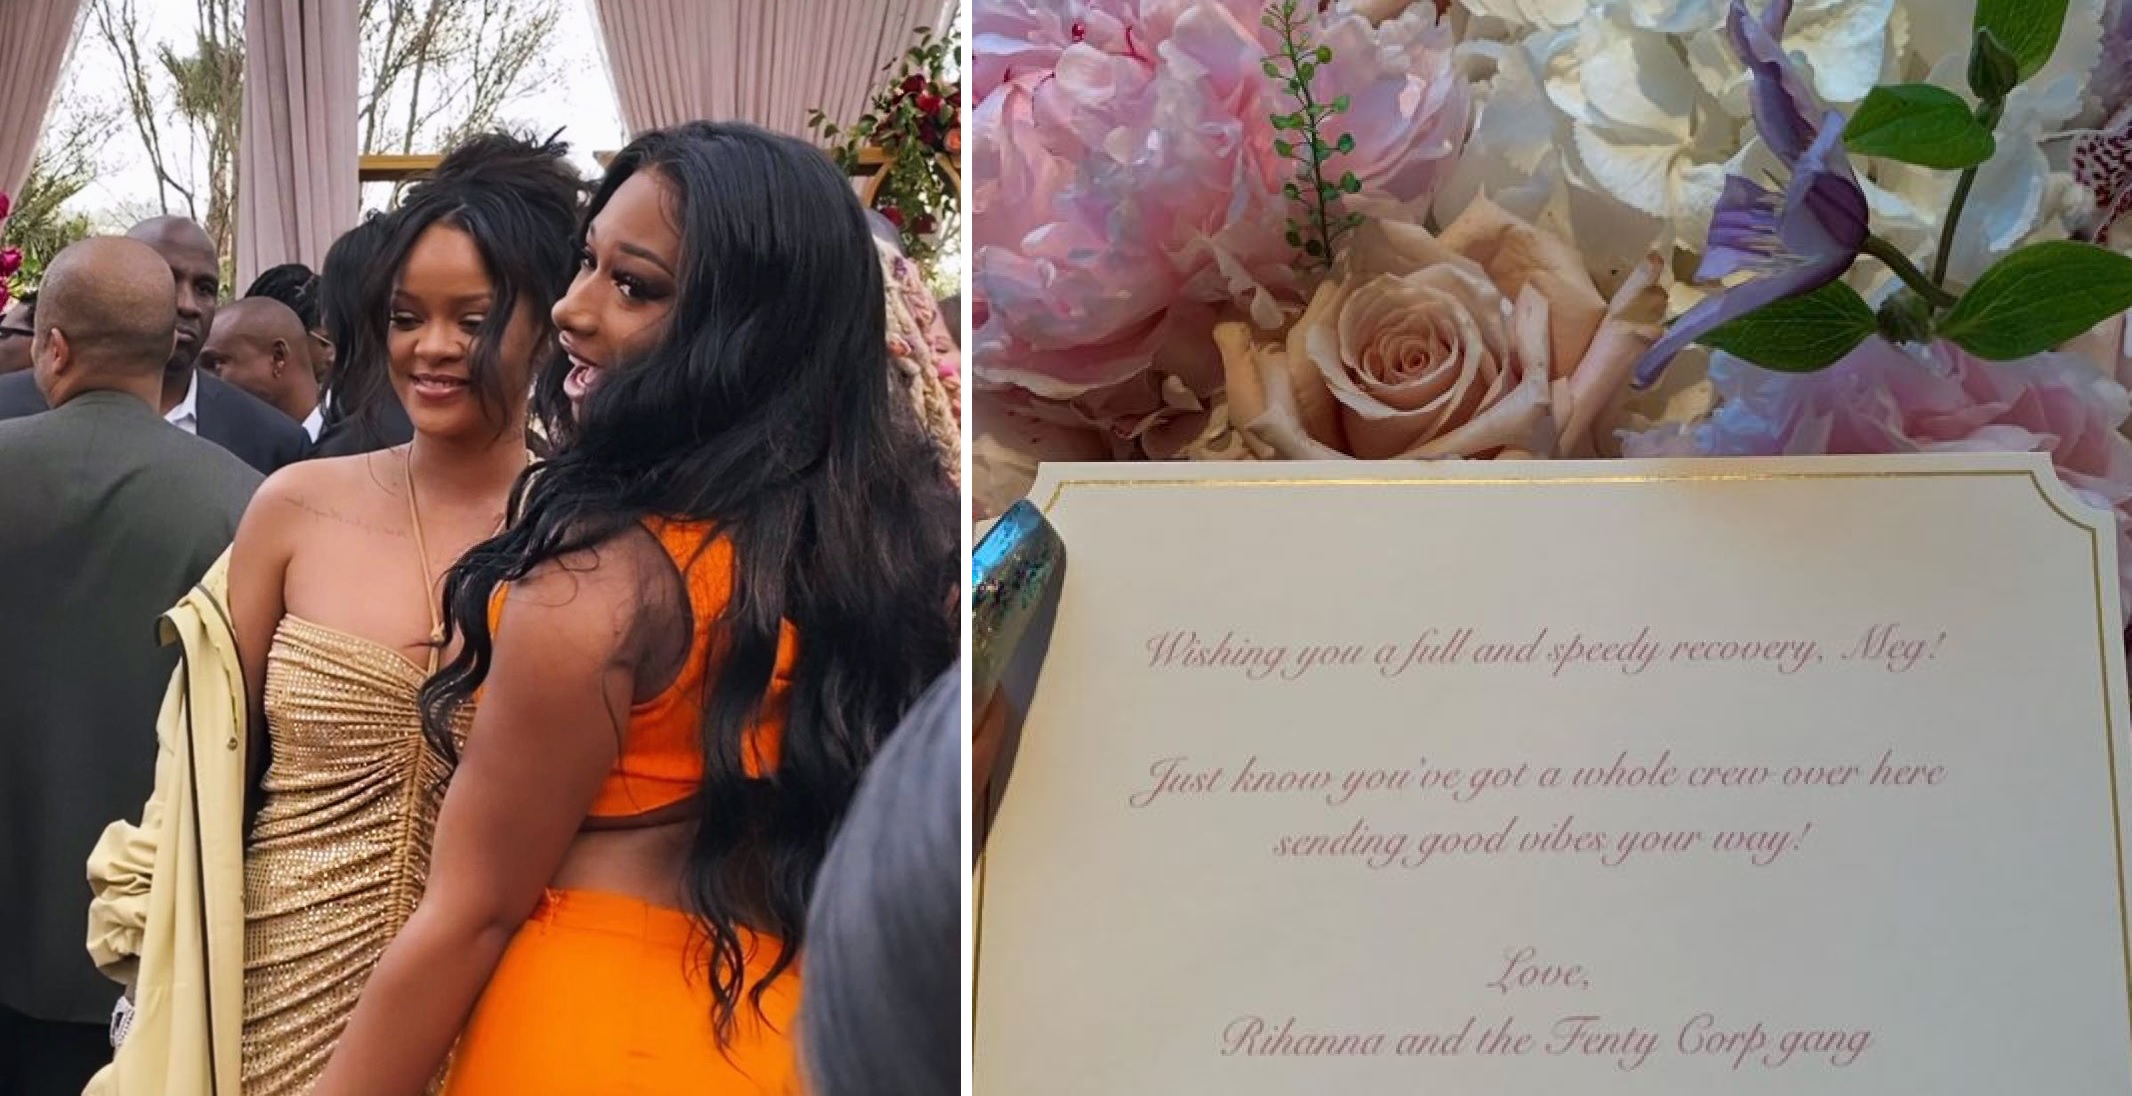 Aww! Rihanna Sends Megan Thee Stallion Her Well Wishes With a Card and Flowers Following Shooting Incident